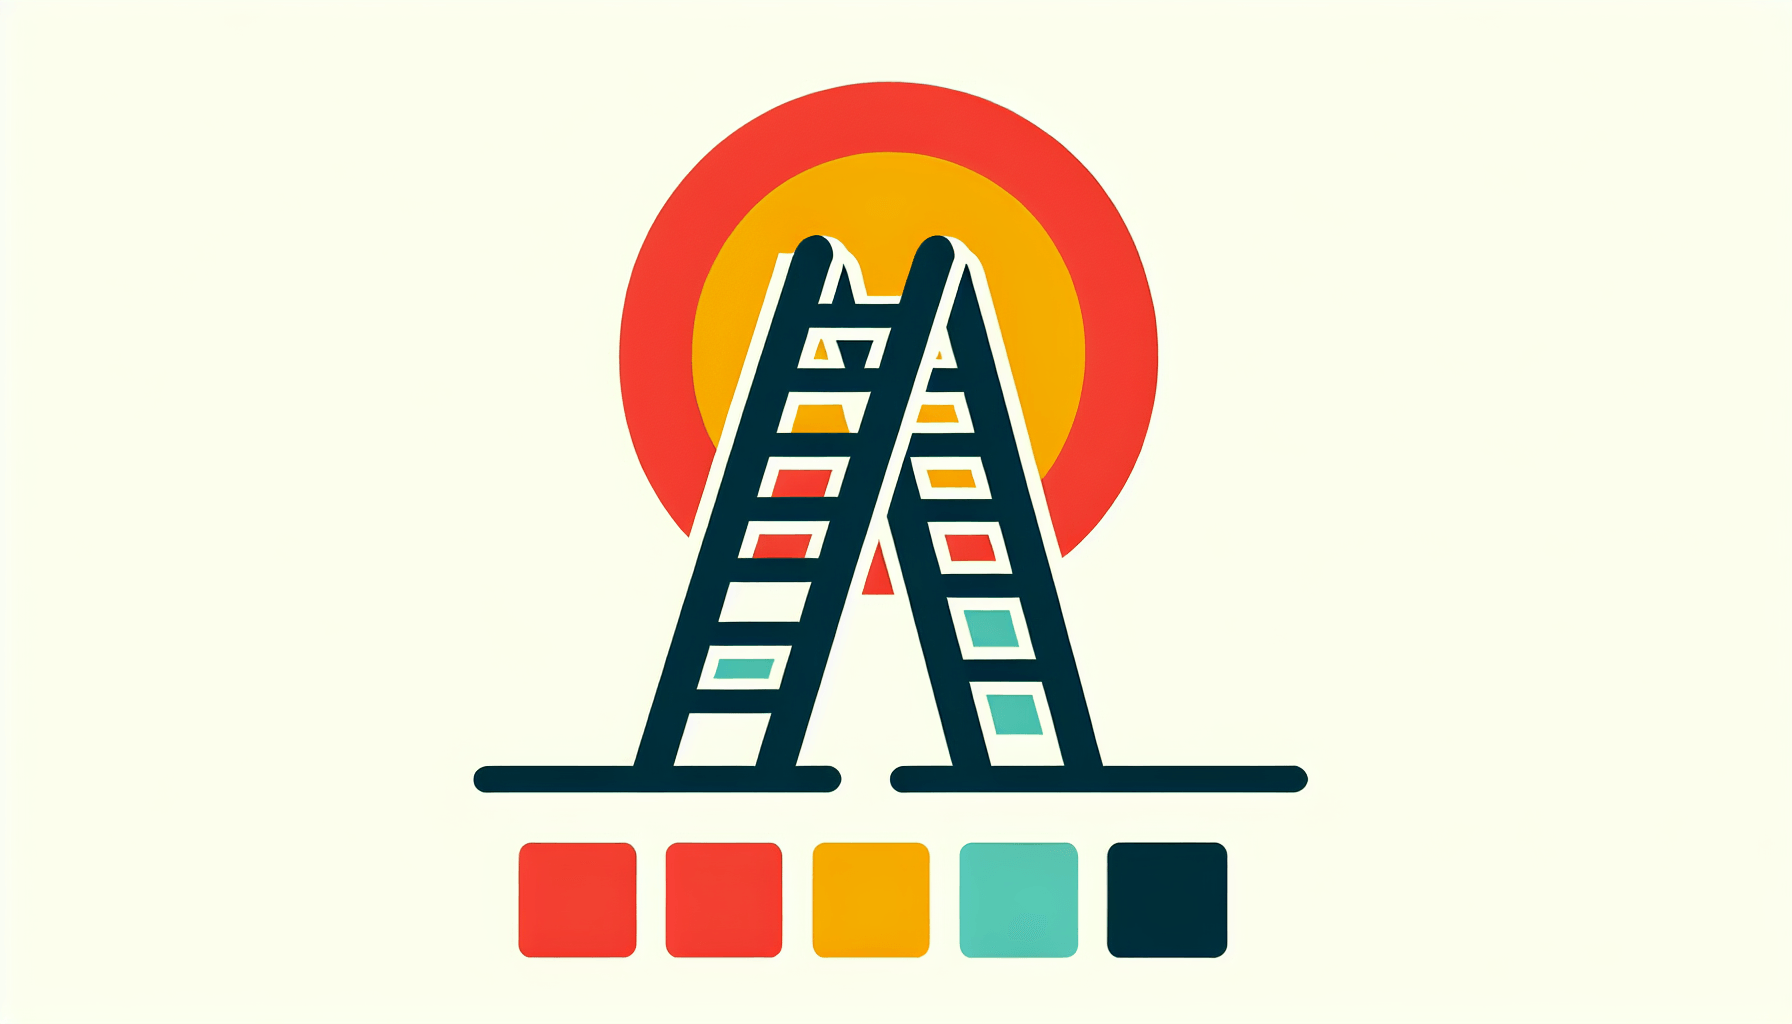 Ladder in flat illustration style and white background, red #f47574, green #88c7a8, yellow #fcc44b, and blue #645bc8 colors.